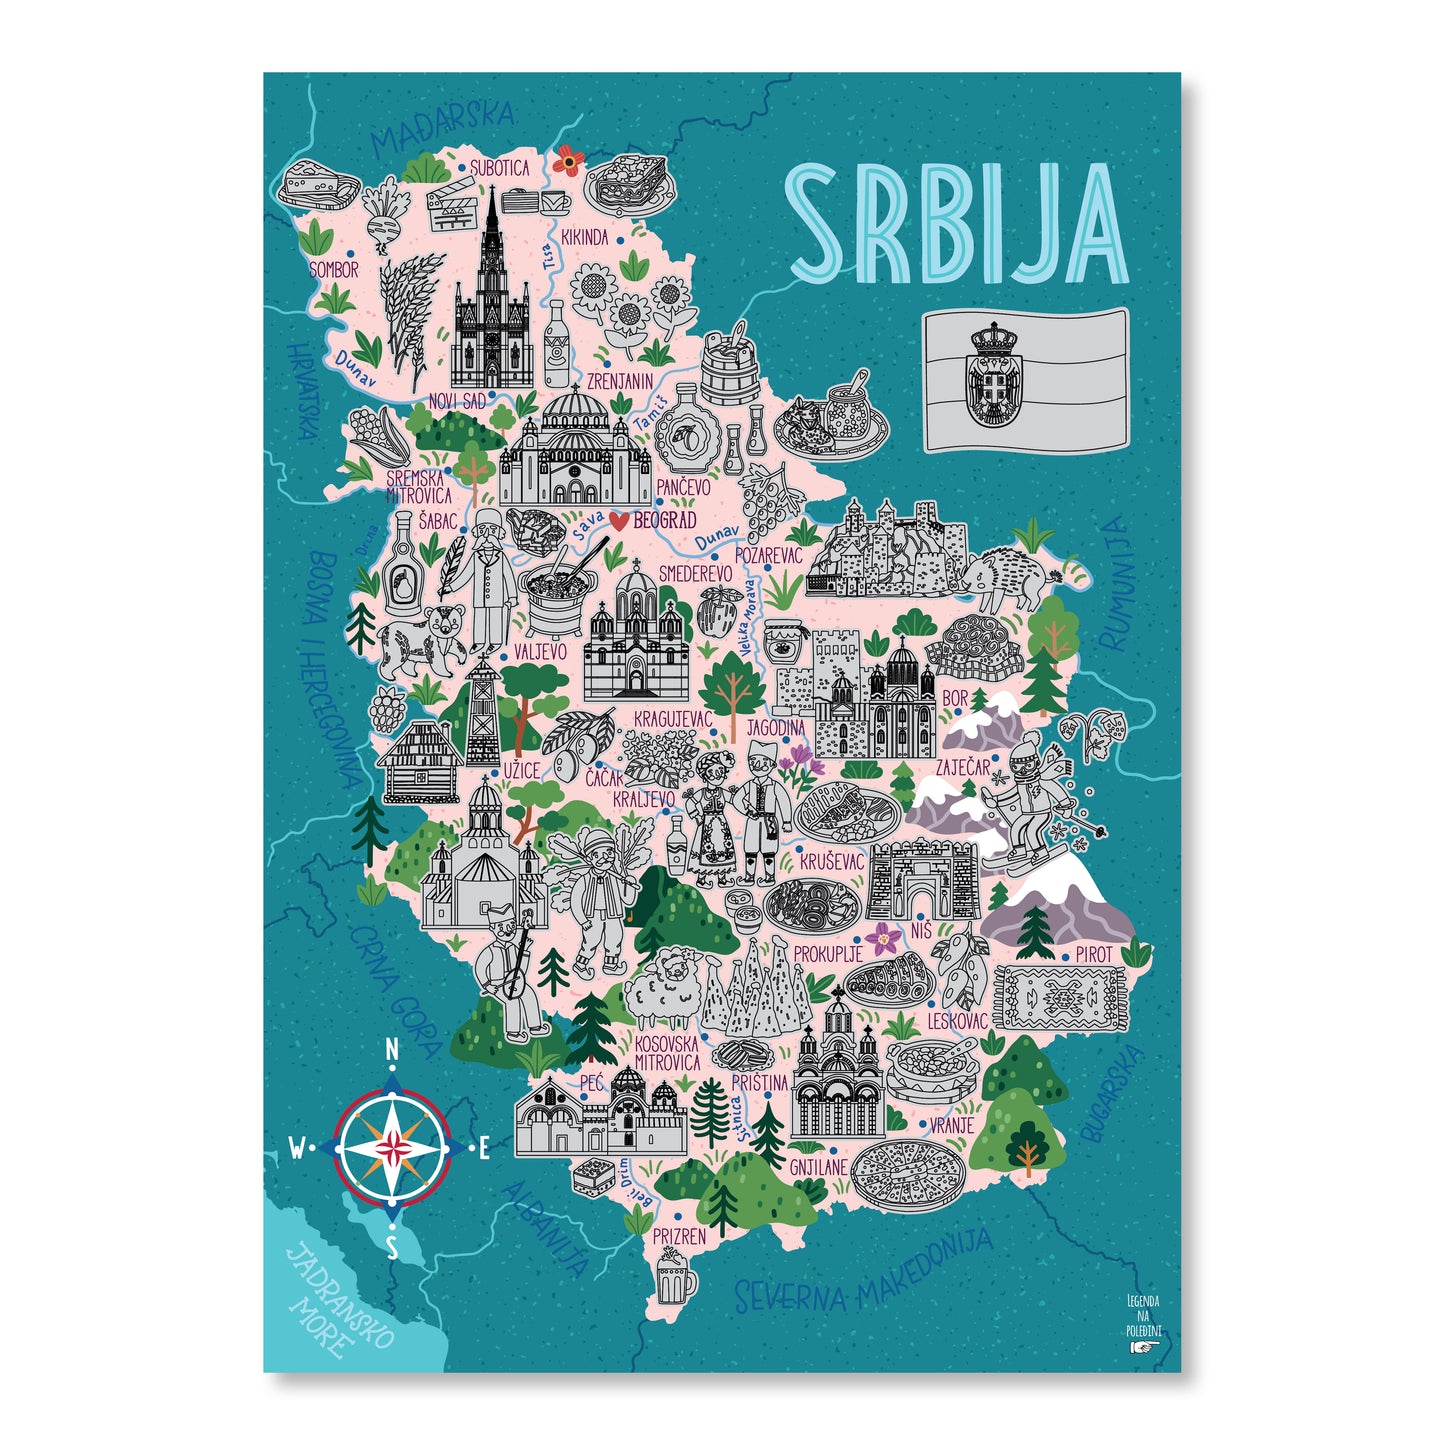 Serbia pictographic scratch off map (latin)